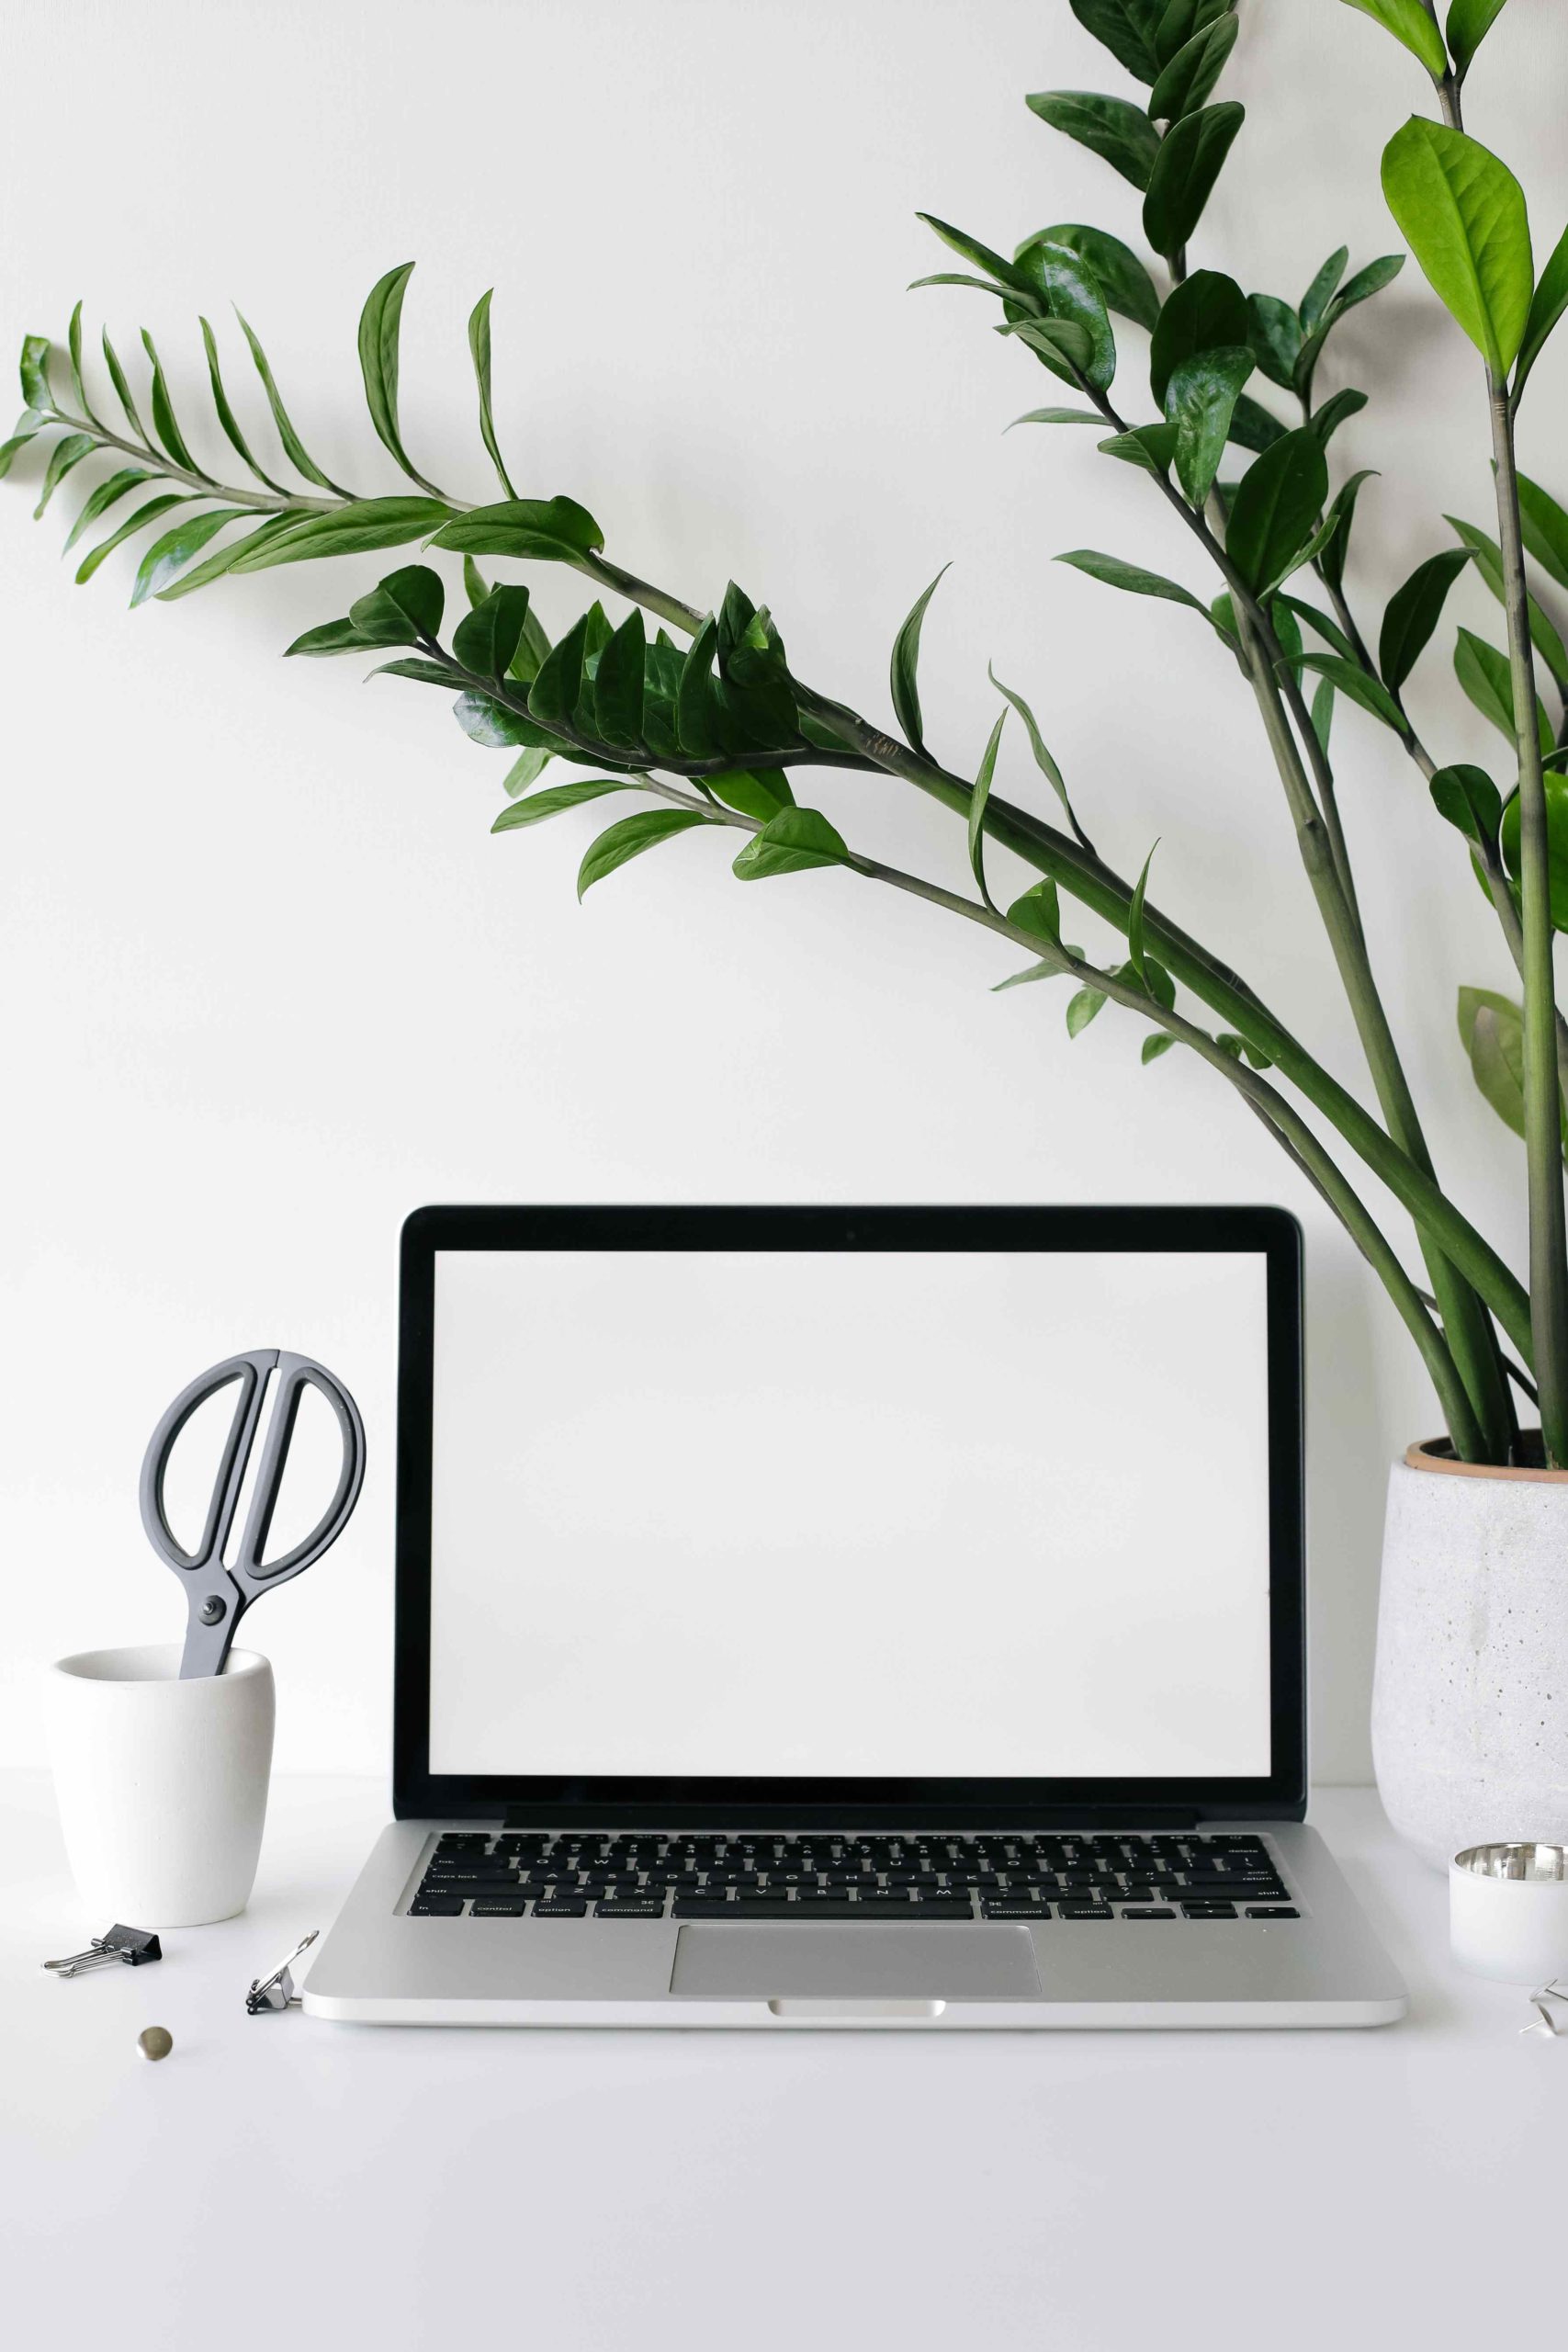 What Are The Benefits of Having Plants in the Office?